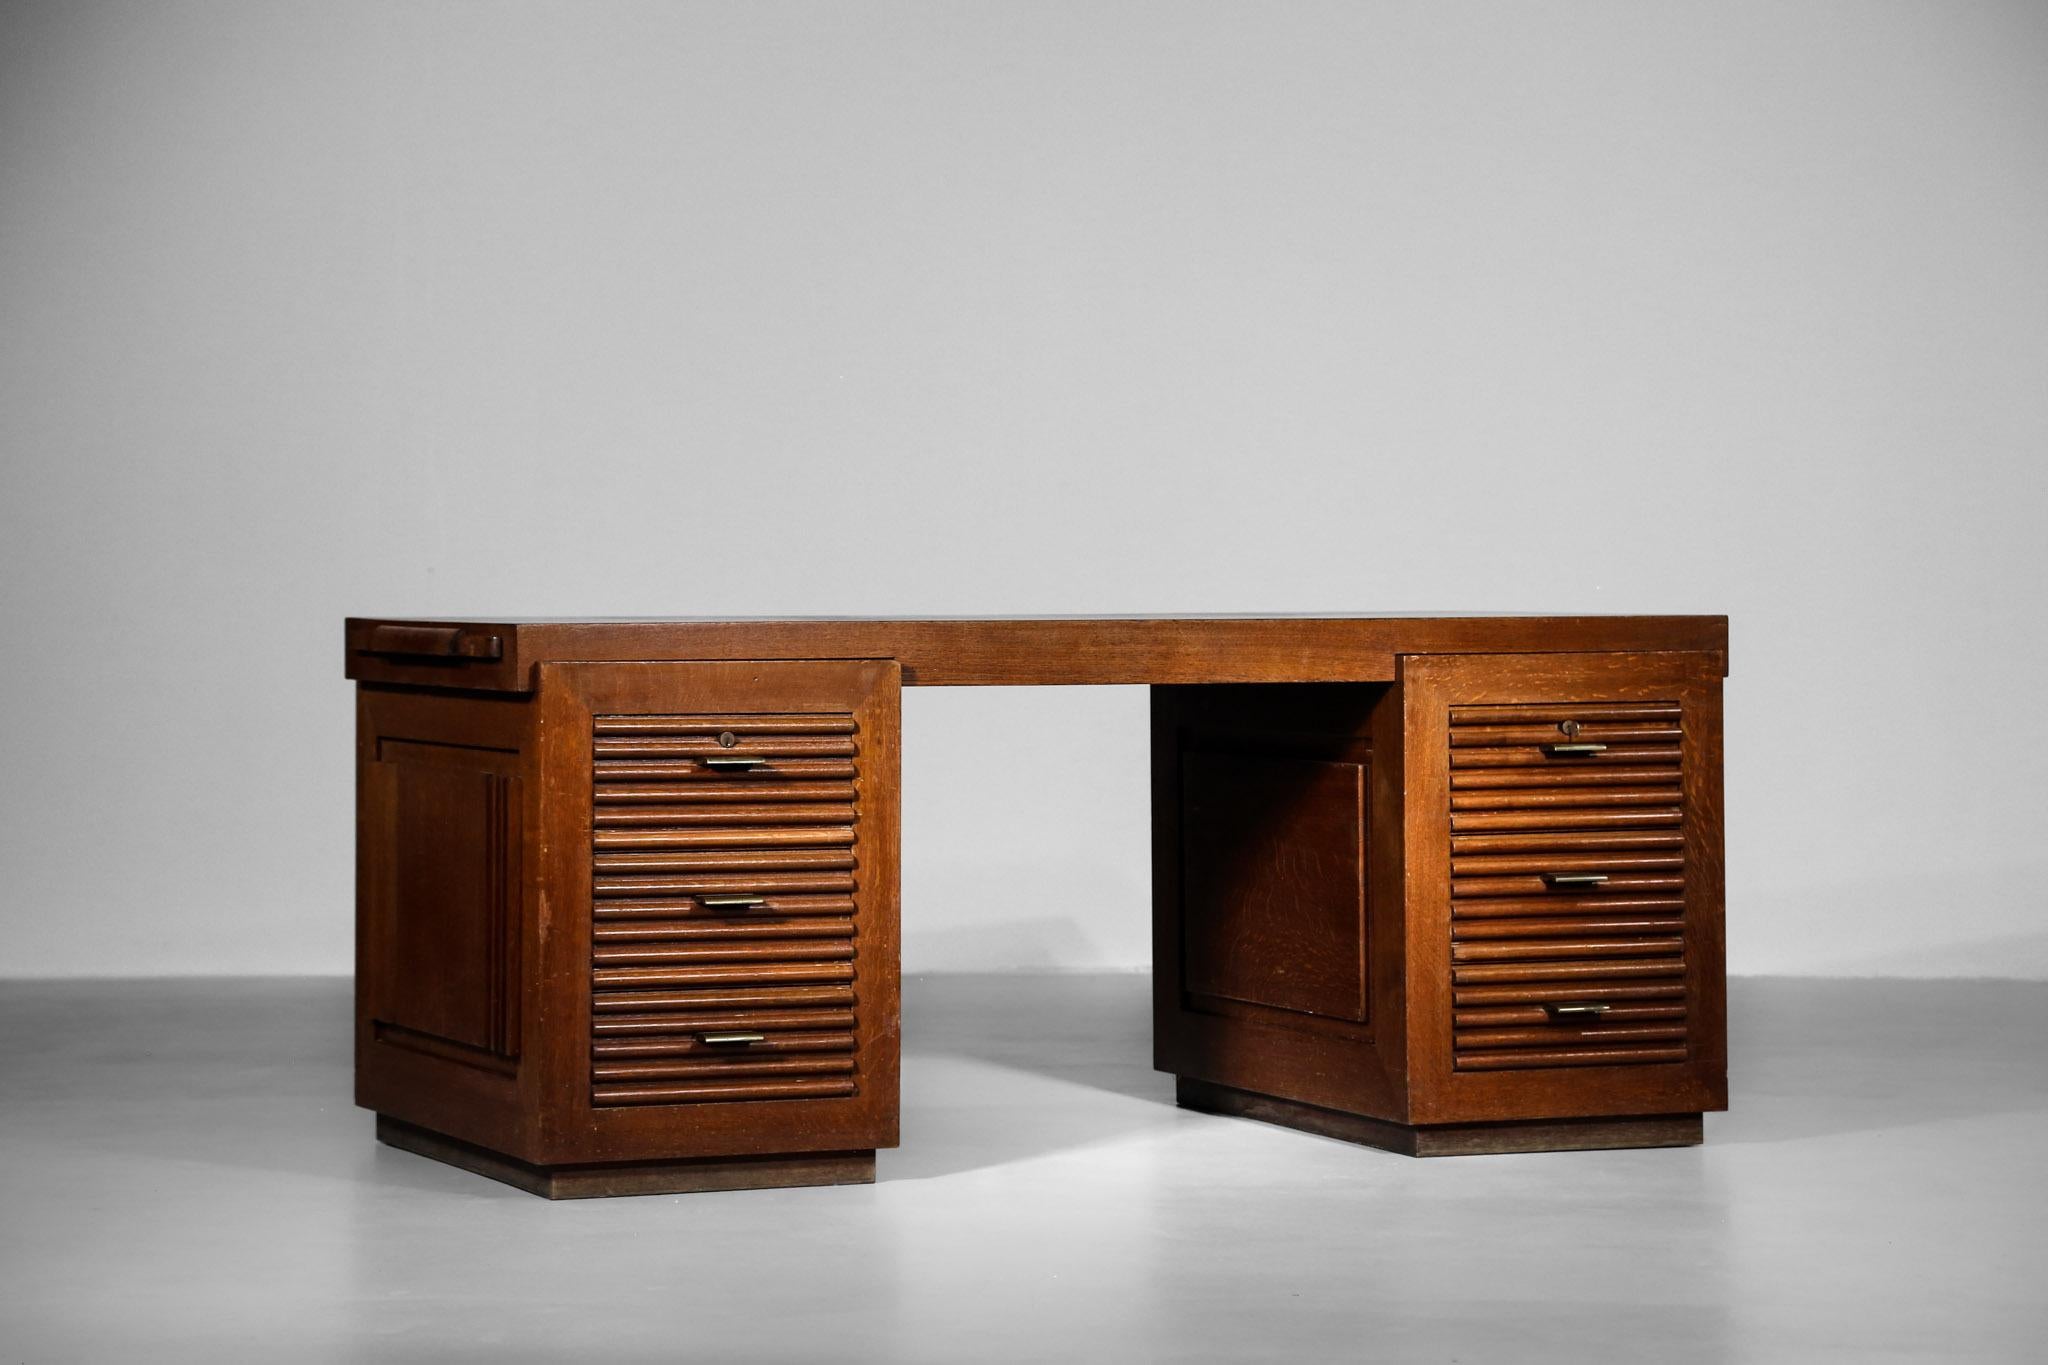 Rare modernist desk designed by Charles Dudouyt.
Composed with 2 cases on each side with 3 drawers and bronze handle. 
Made of massive oak. We also provide one original key.
Really nice quality work.